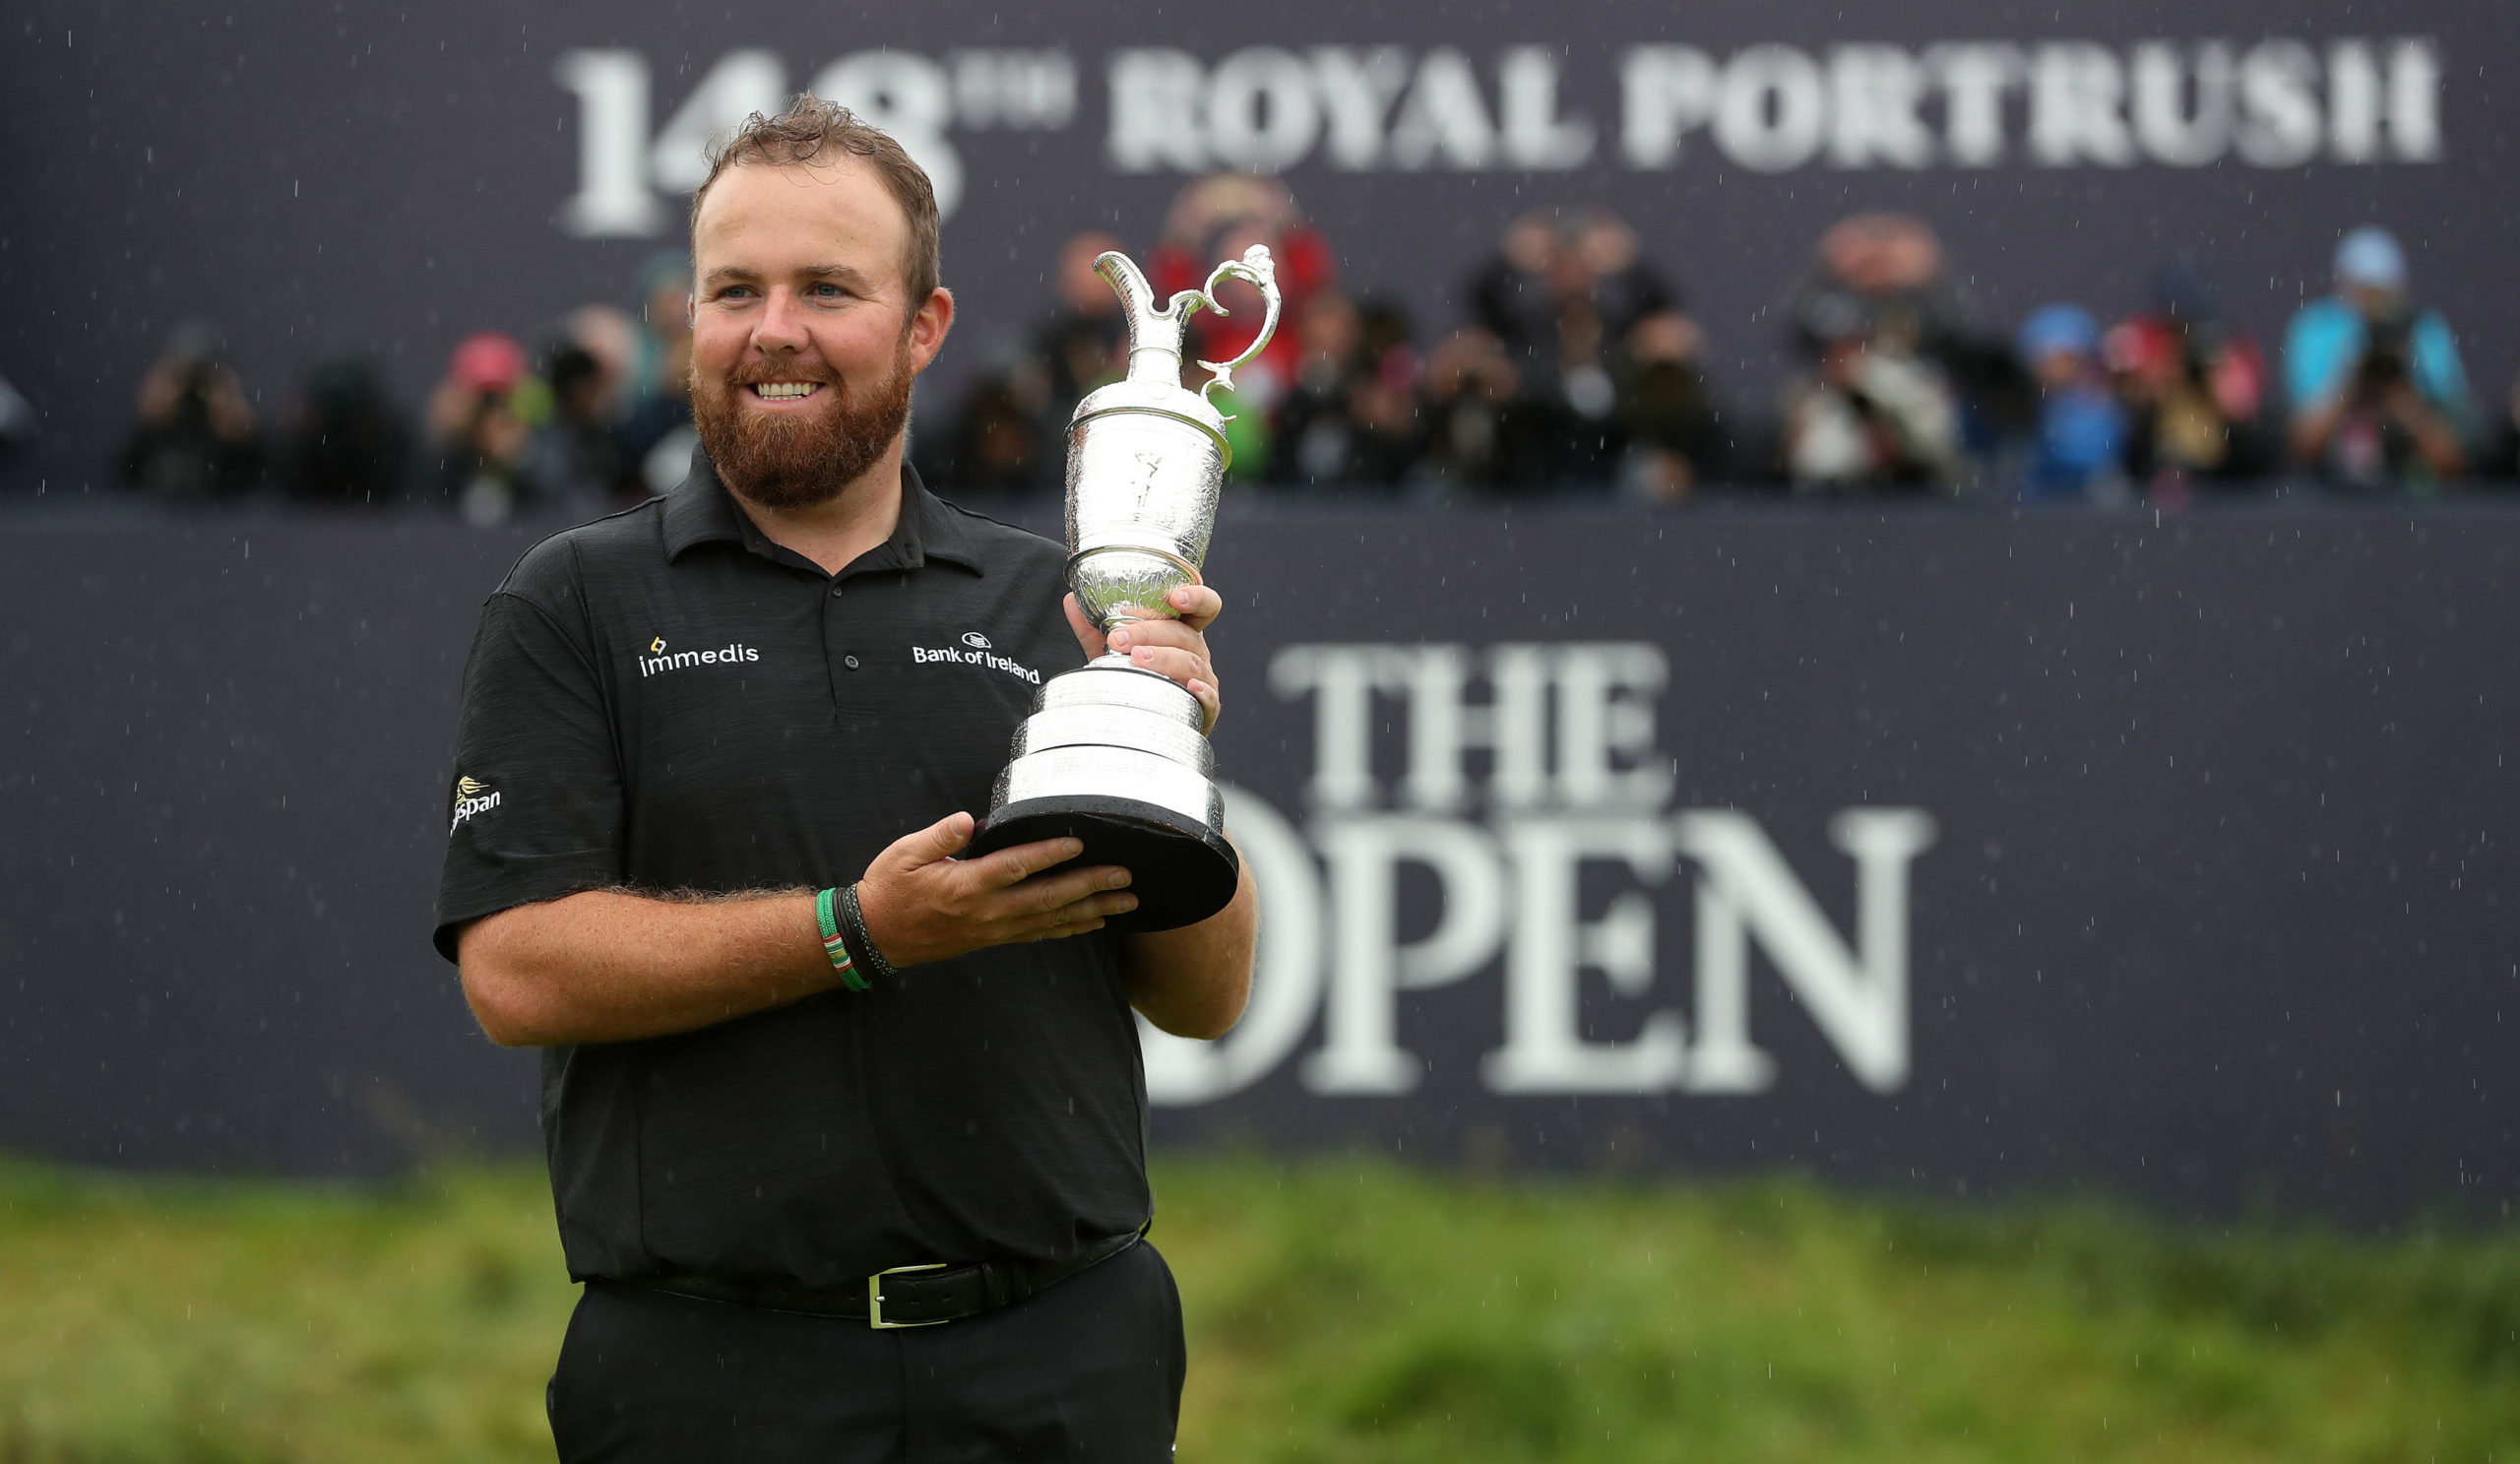 Shane Lowry was crowned Open champion at Royal Portrush last year